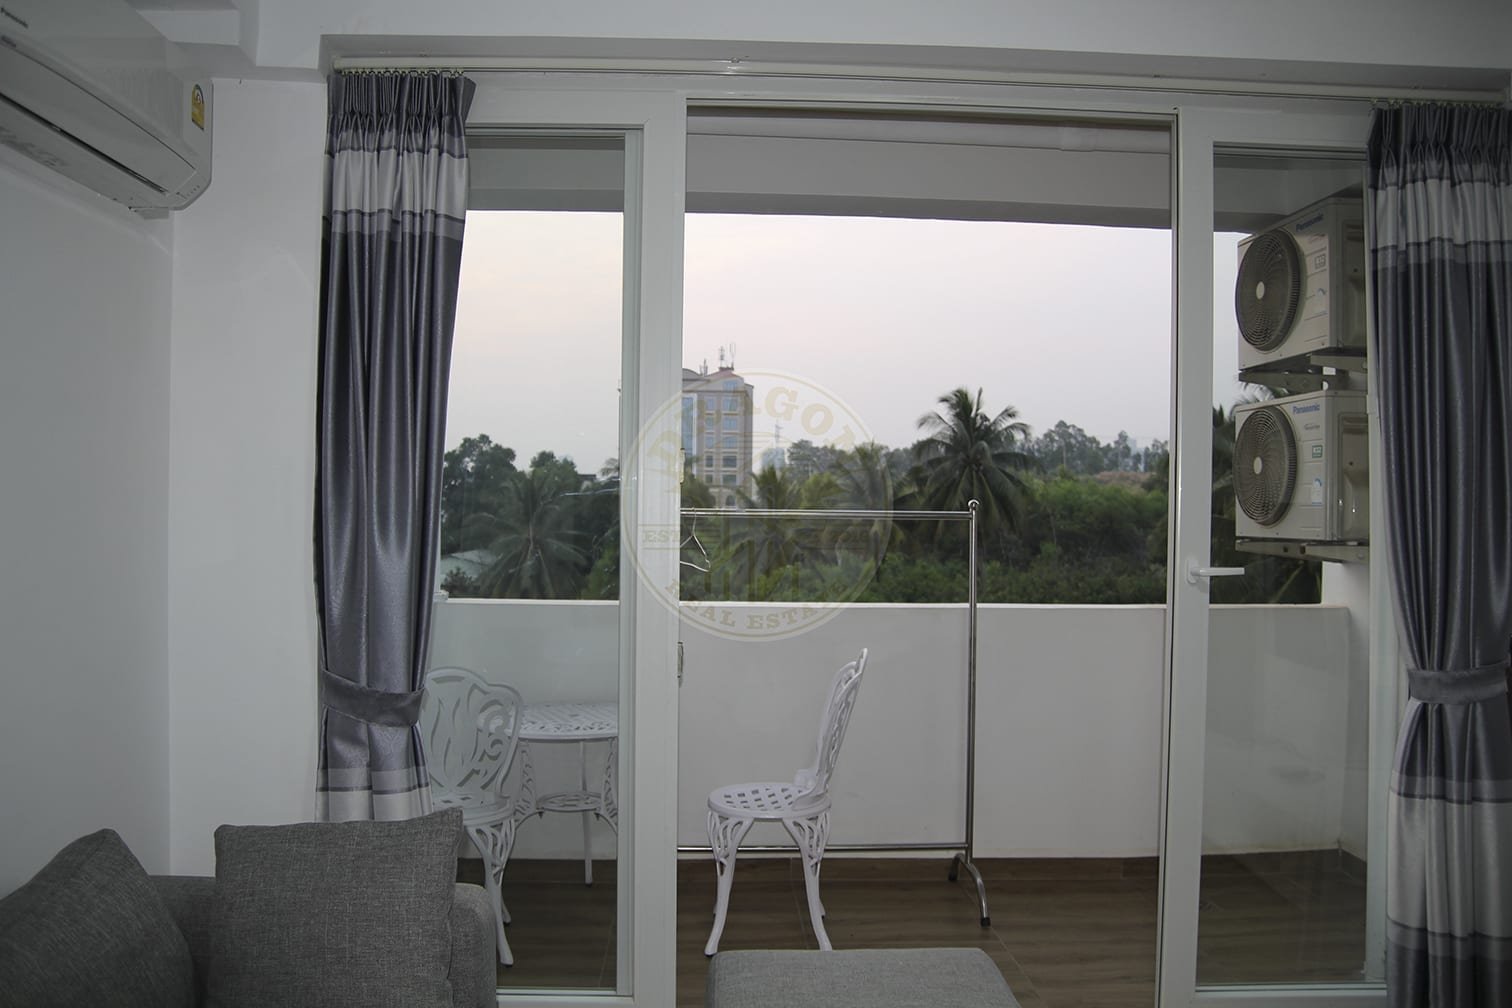 Location, Community, Quality Living Rent an Apartment in Sihanoukville. Rooms for Rent in Sihanoukville Cambodia